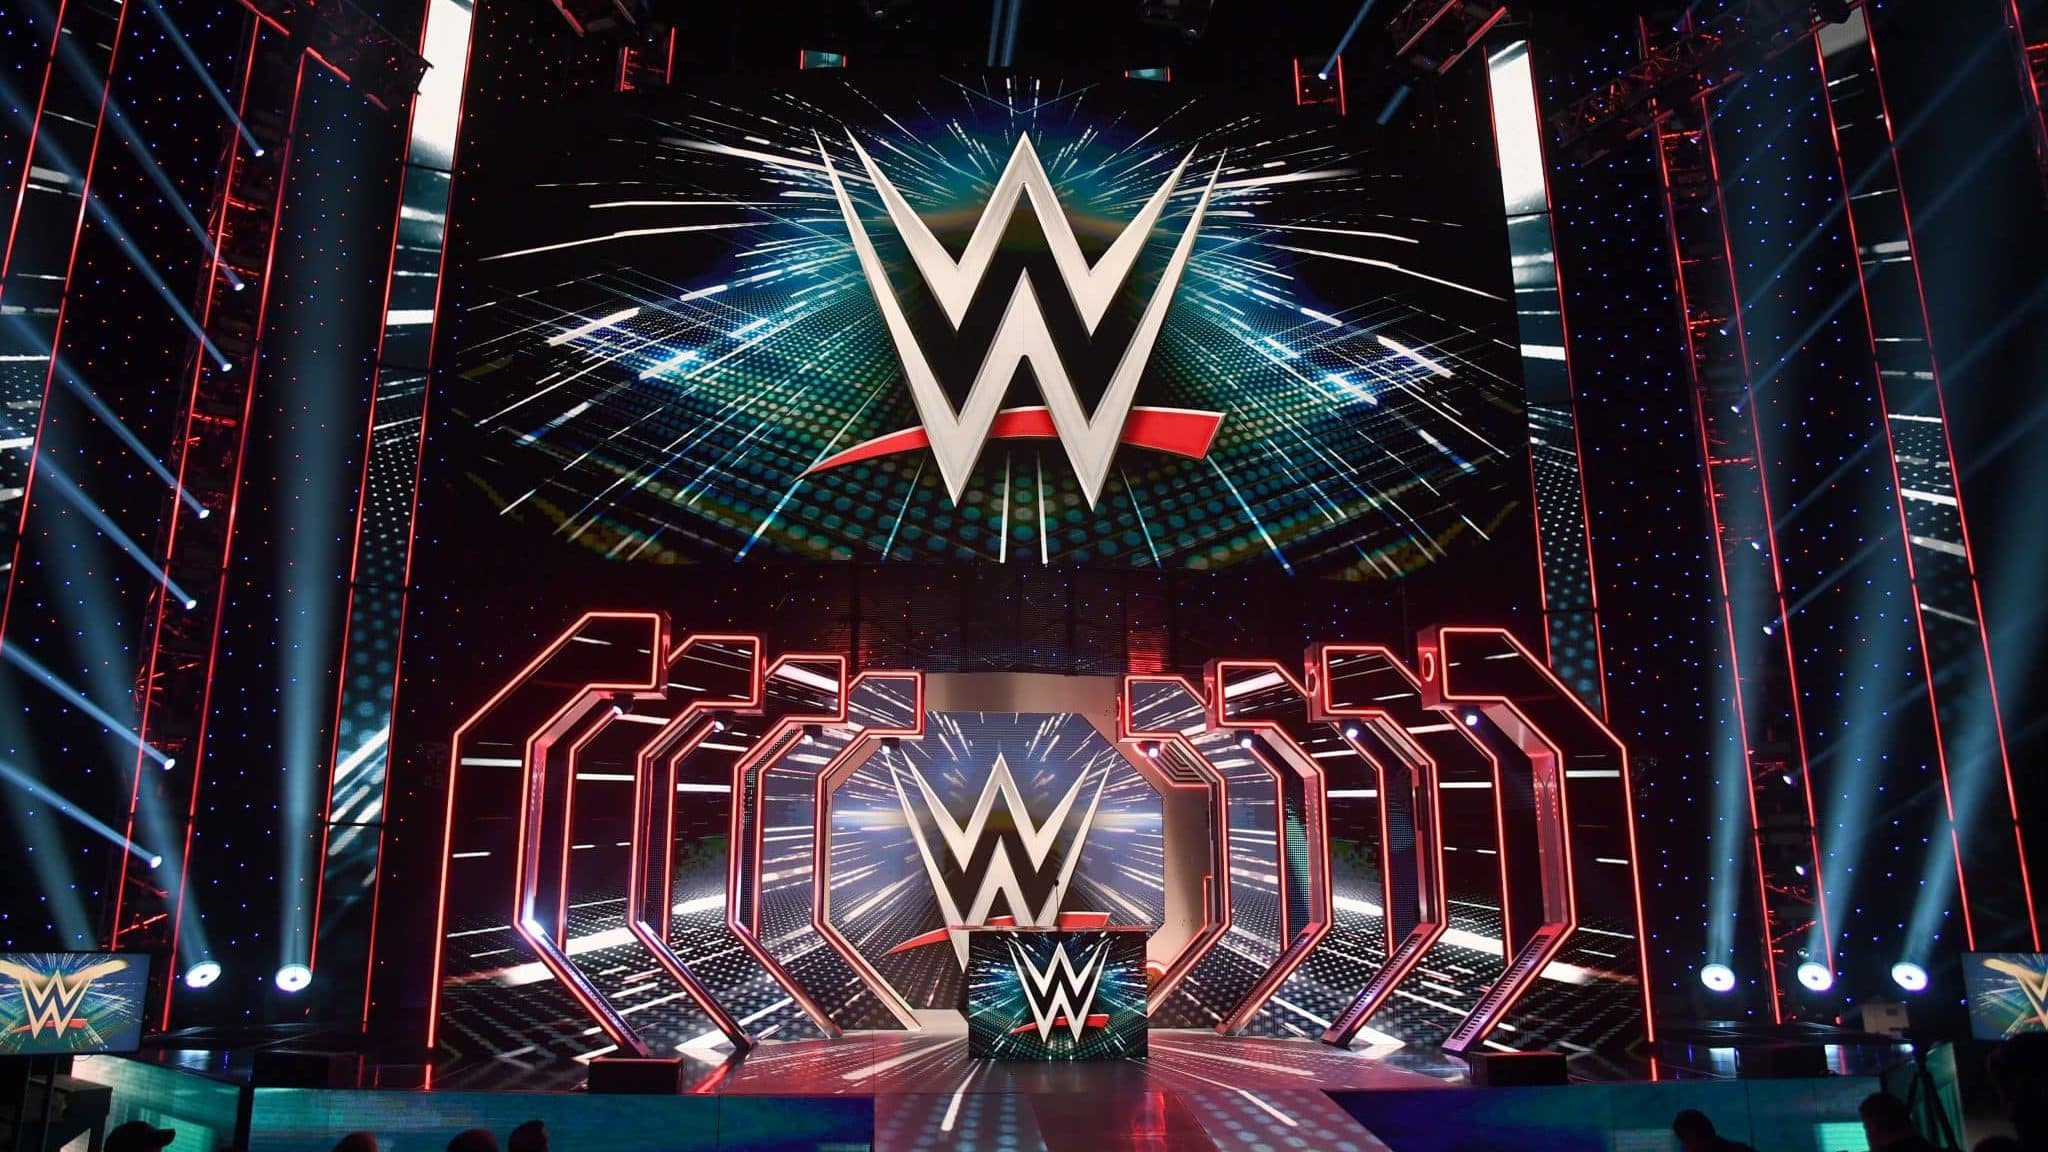 LAS VEGAS, NEVADA - OCTOBER 11: WWE logos are shown on screens before a WWE news conference at T-Mobile Arena on October 11, 2019 in Las Vegas, Nevada. It was announced that WWE wrestler Braun Strowman will face heavyweight boxer Tyson Fury and WWE champion Brock Lesnar will take on former UFC heavyweight champion Cain Velasquez at the WWE's Crown Jewel event at Fahd International Stadium in Riyadh, Saudi Arabia on October 31.